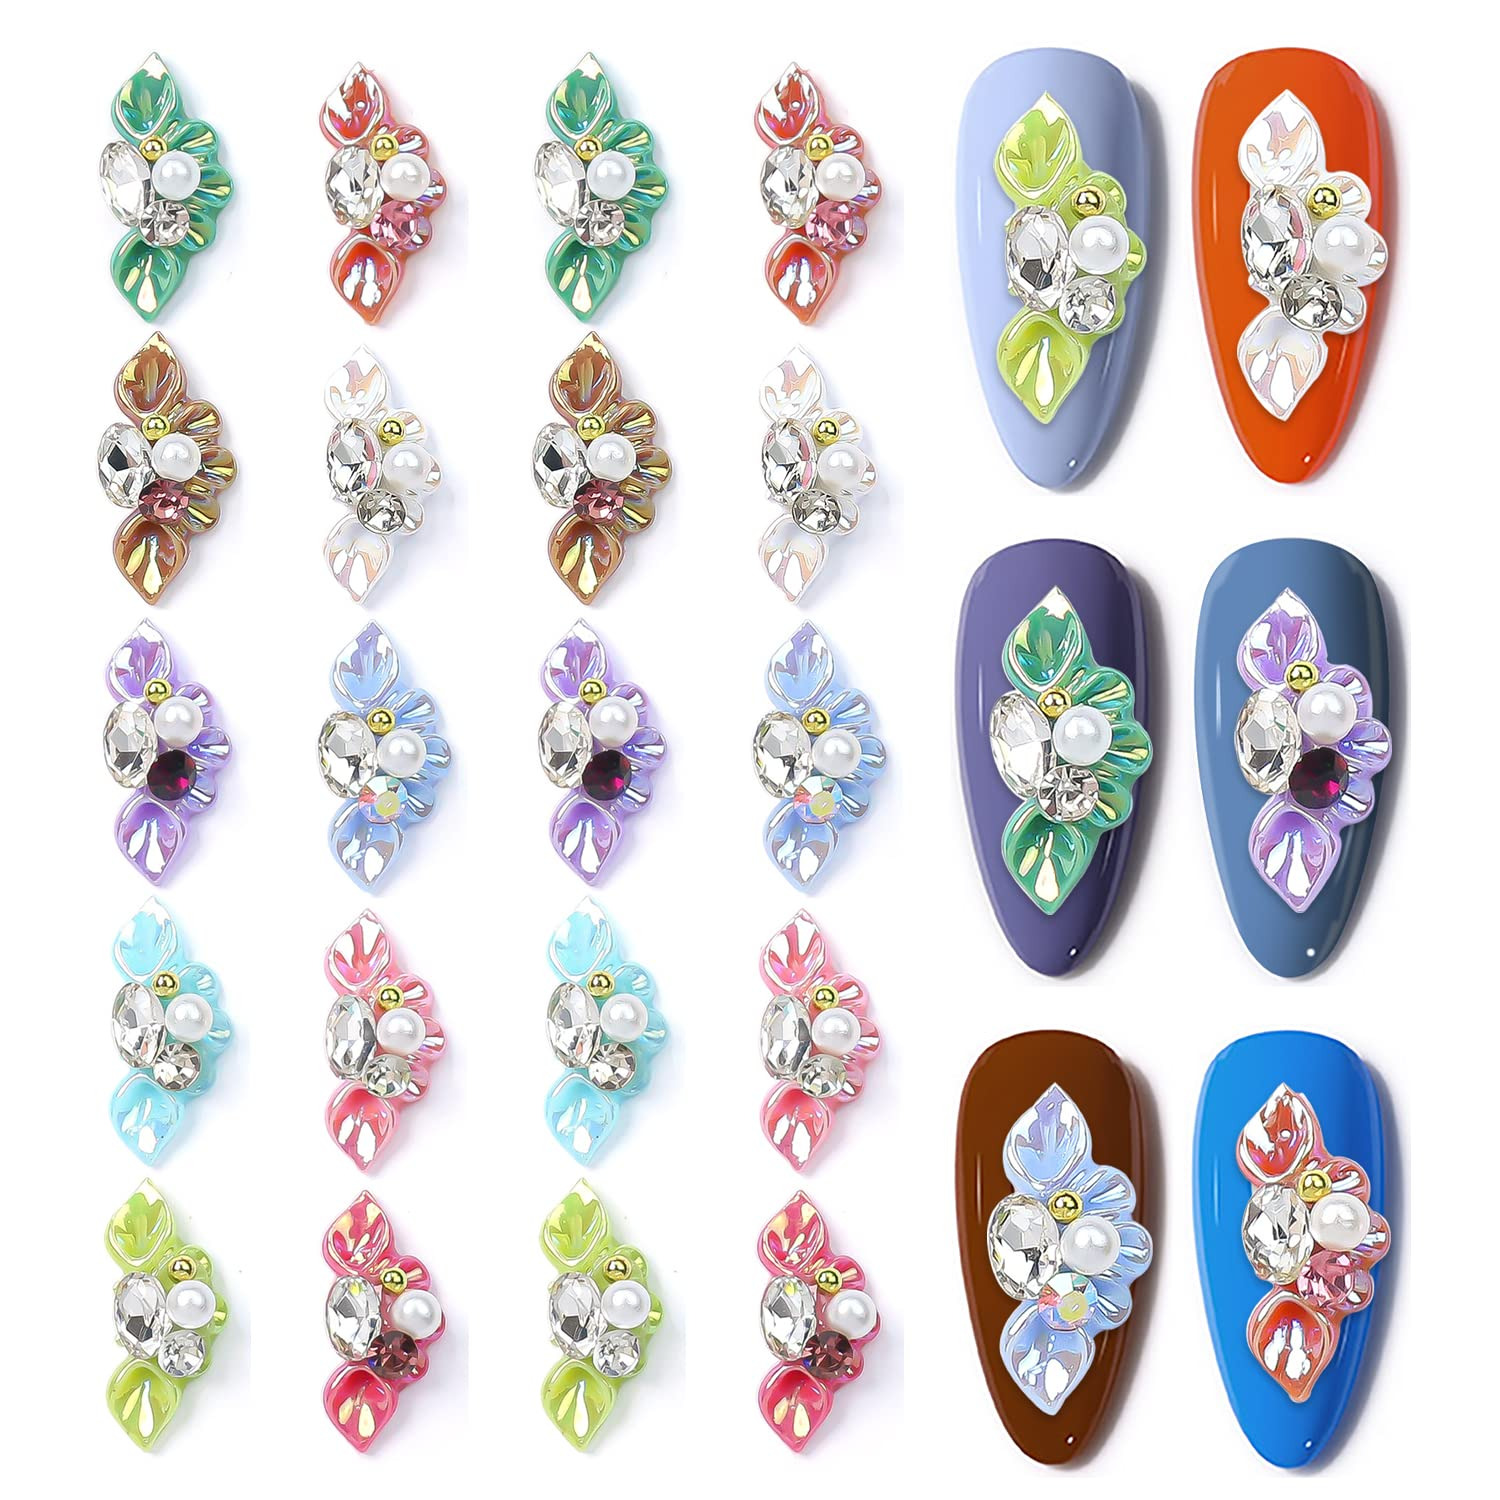 20PCS 3D Flower Nail Charms for Nails Mix Color Pearls Crystals Design 3D Flower